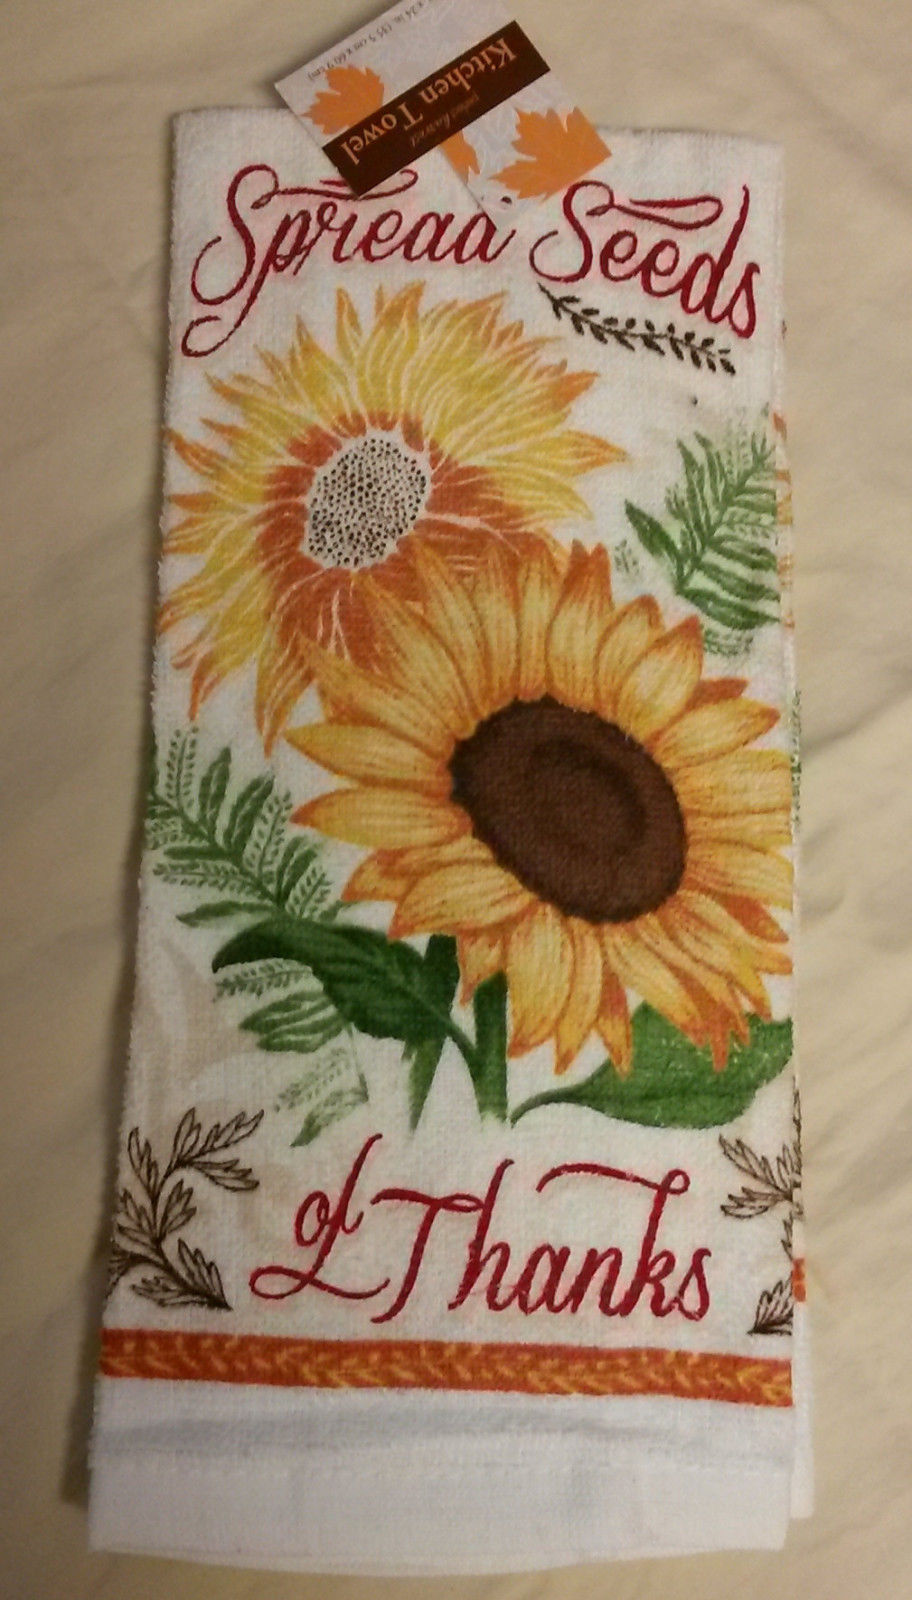 FALL SUNFLOWER KITCHEN TOWEL Spread Seeds of Thanks Thanksgiving NEW - $3.99